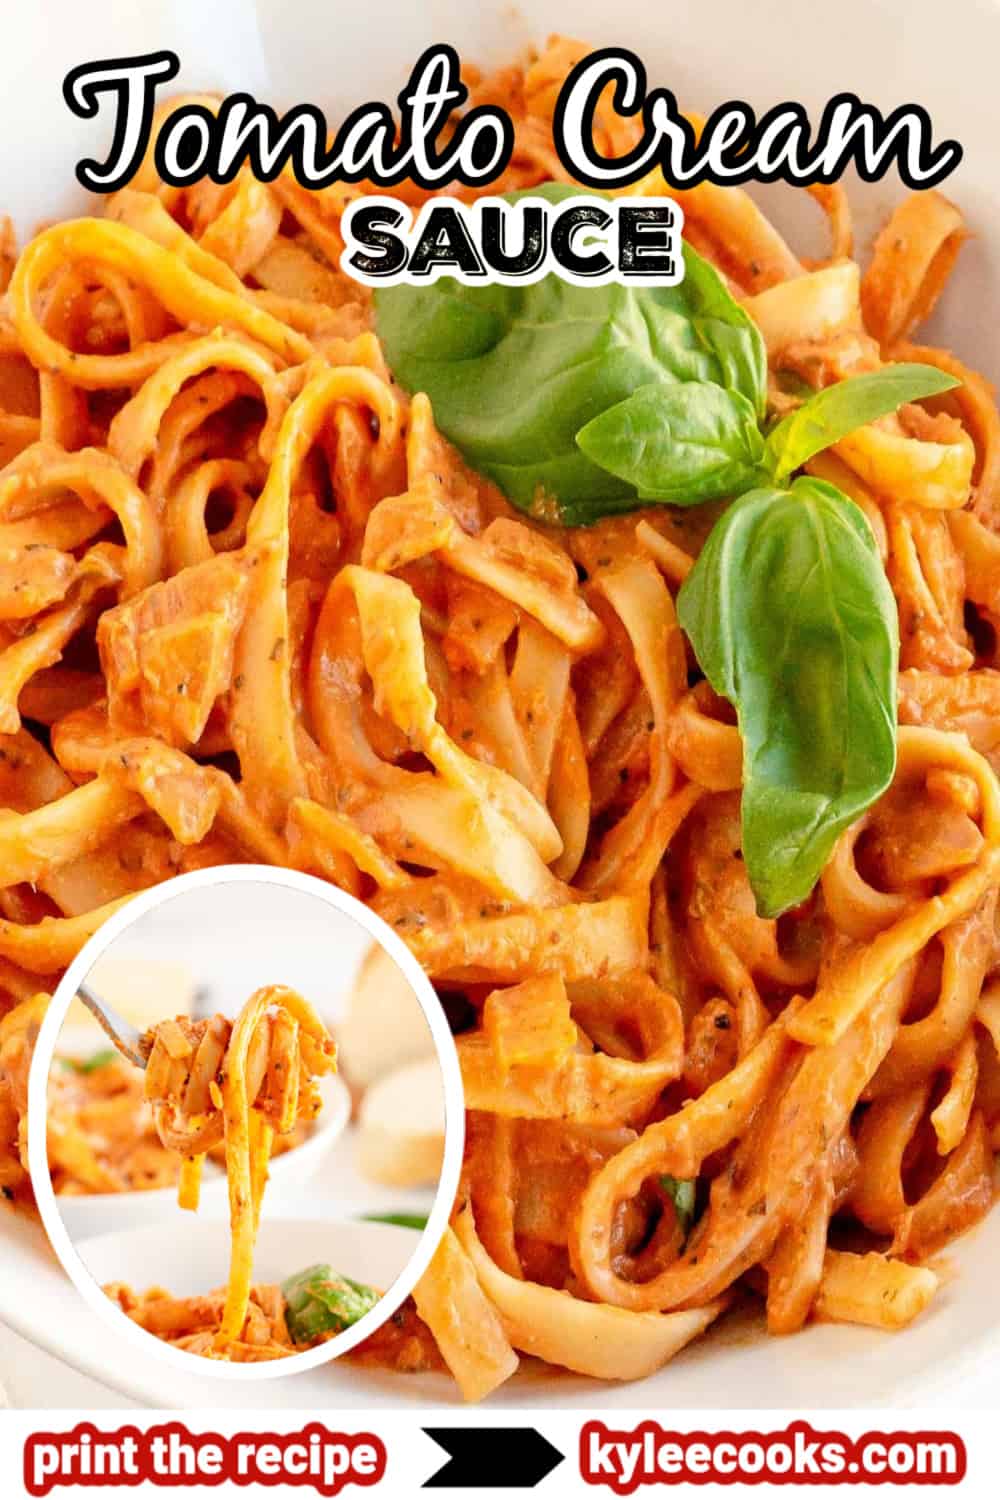 tomato cream sauce with text and ingredients overlaid on top